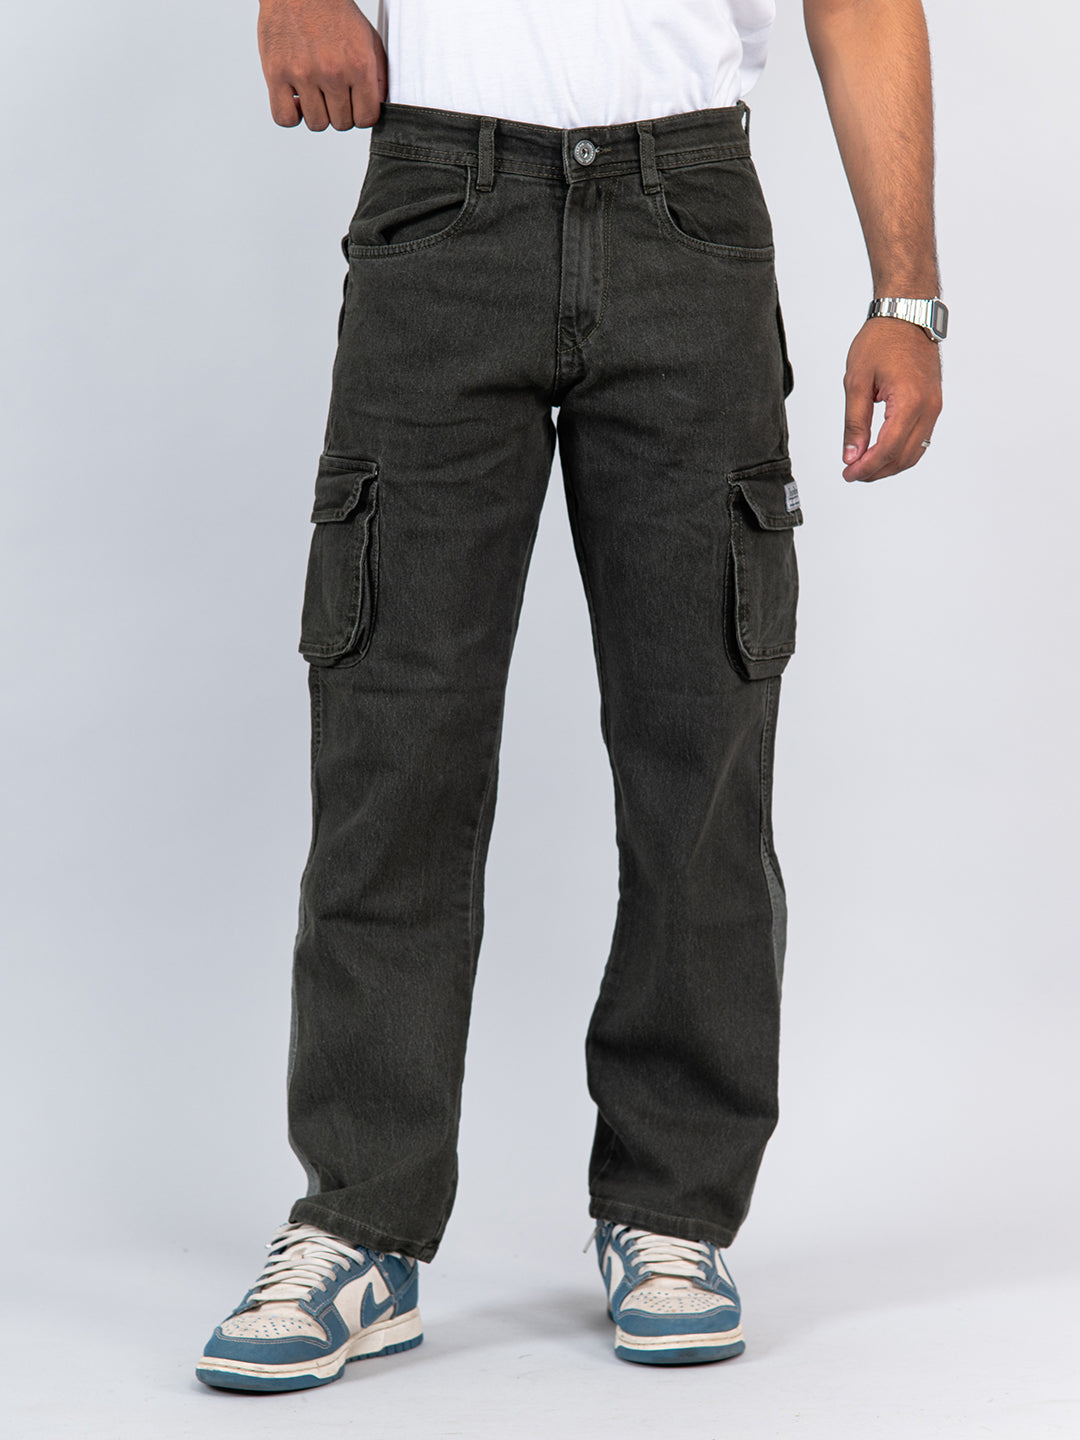 olive green cargo jeans